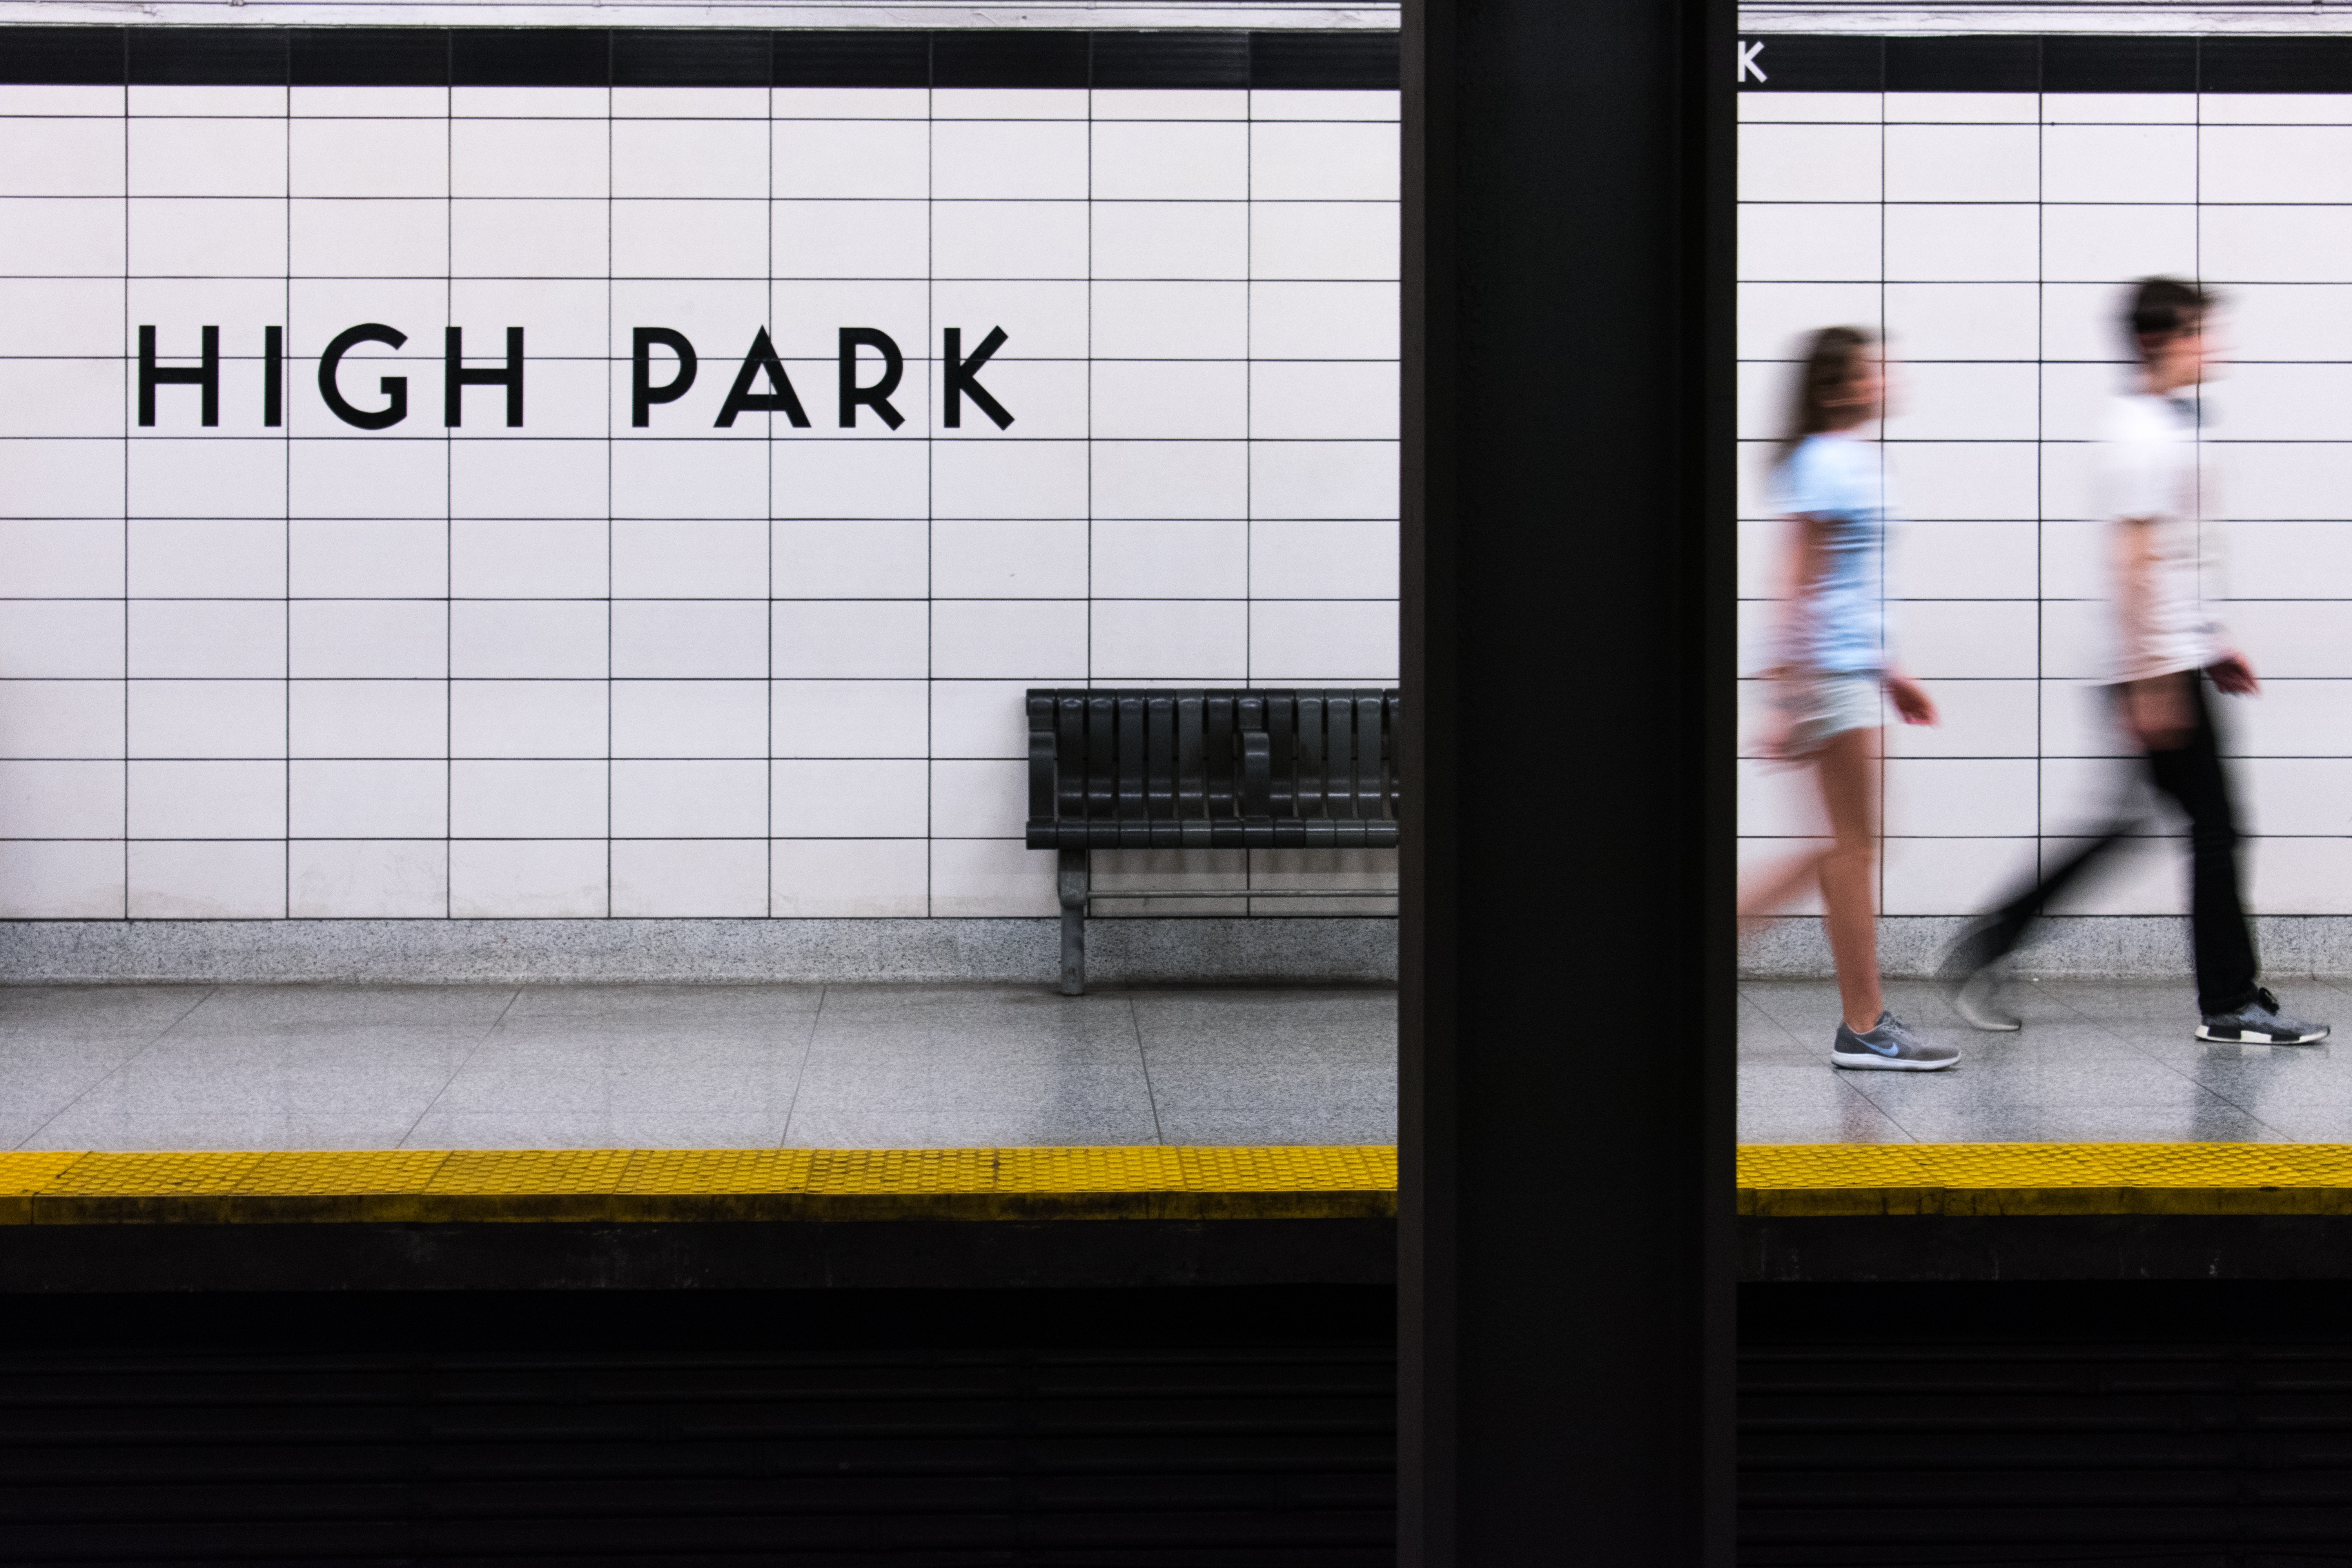 Subway station "High Park" in Toronto